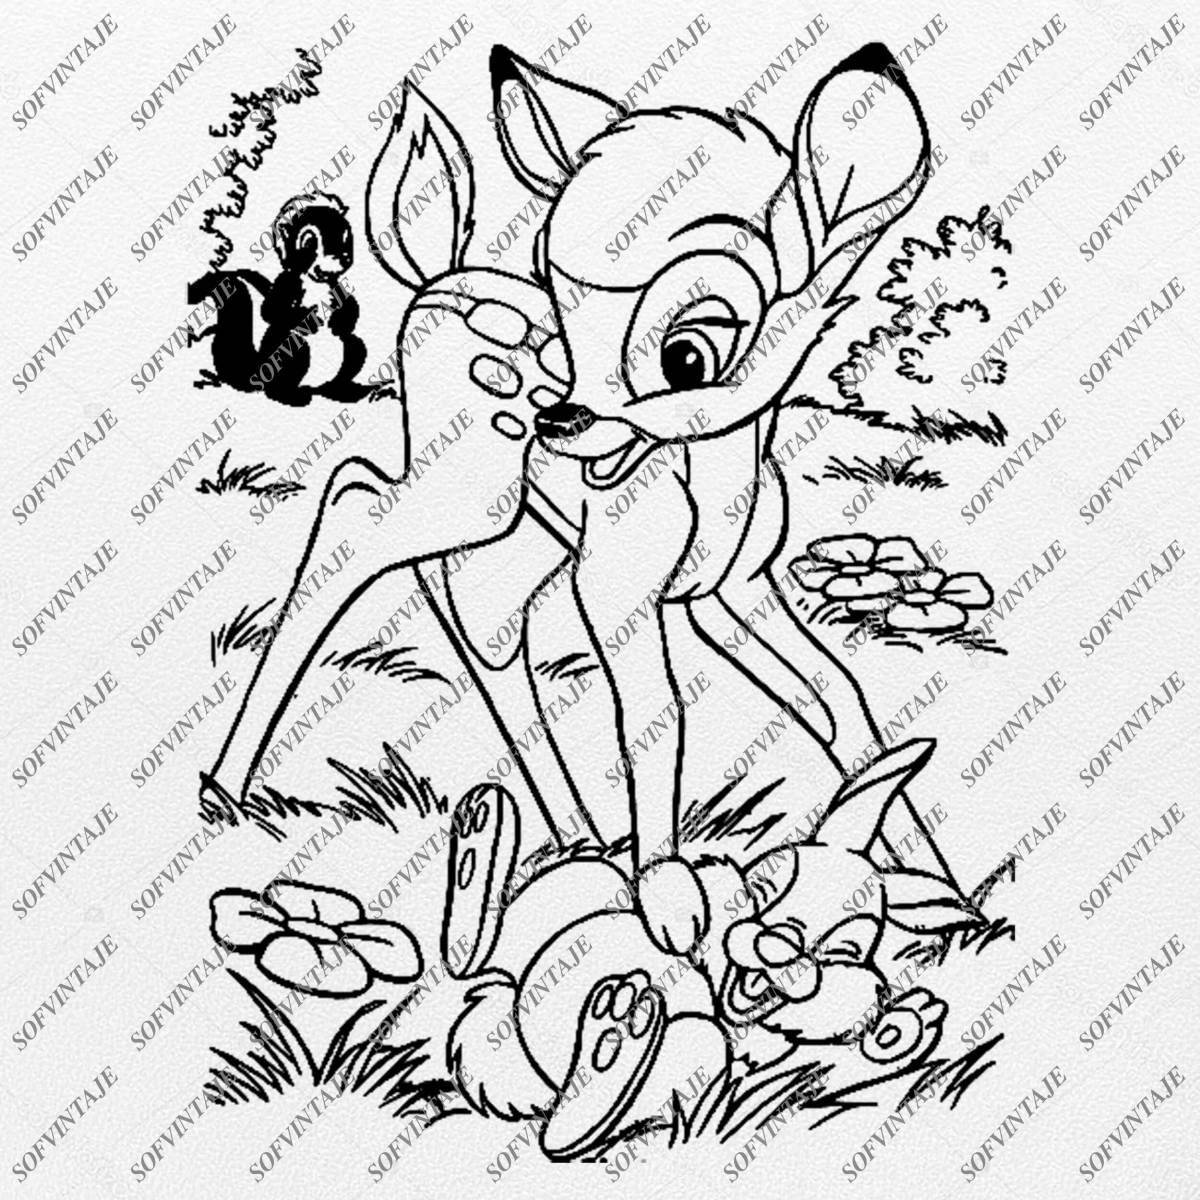 Cute bambi coloring book for kids 3-4 years old